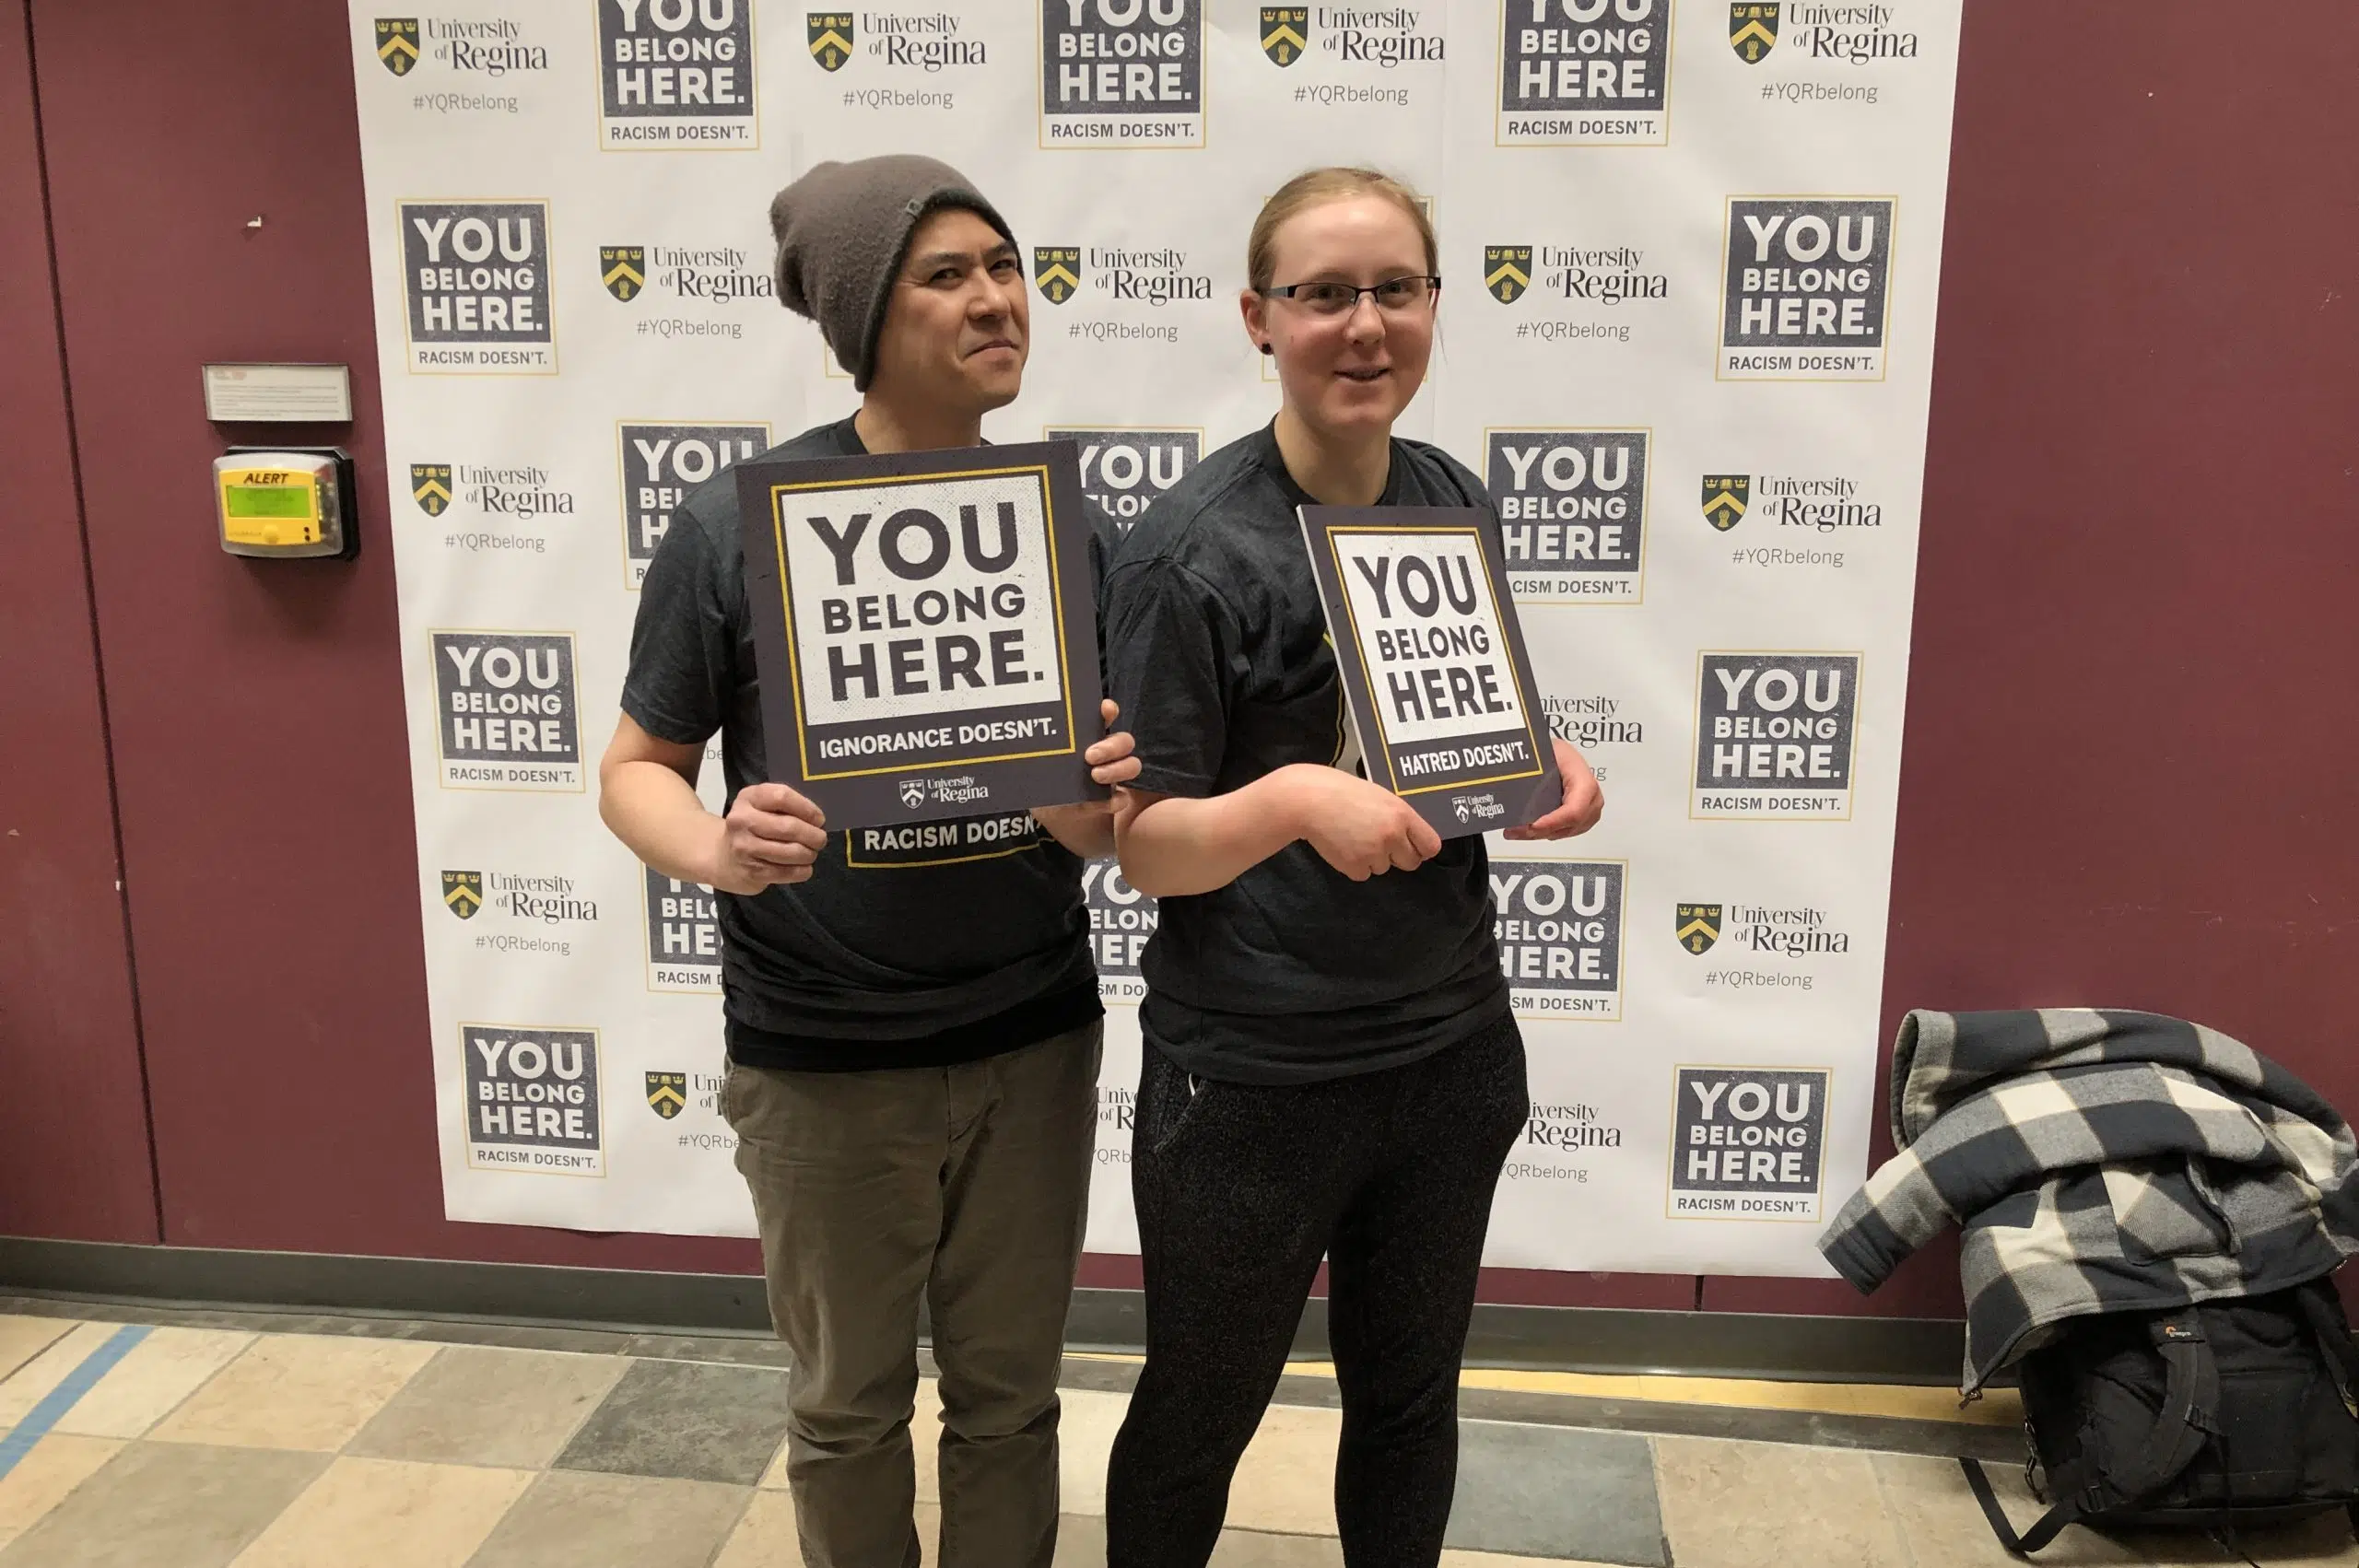 U of R launches campaign to end racism